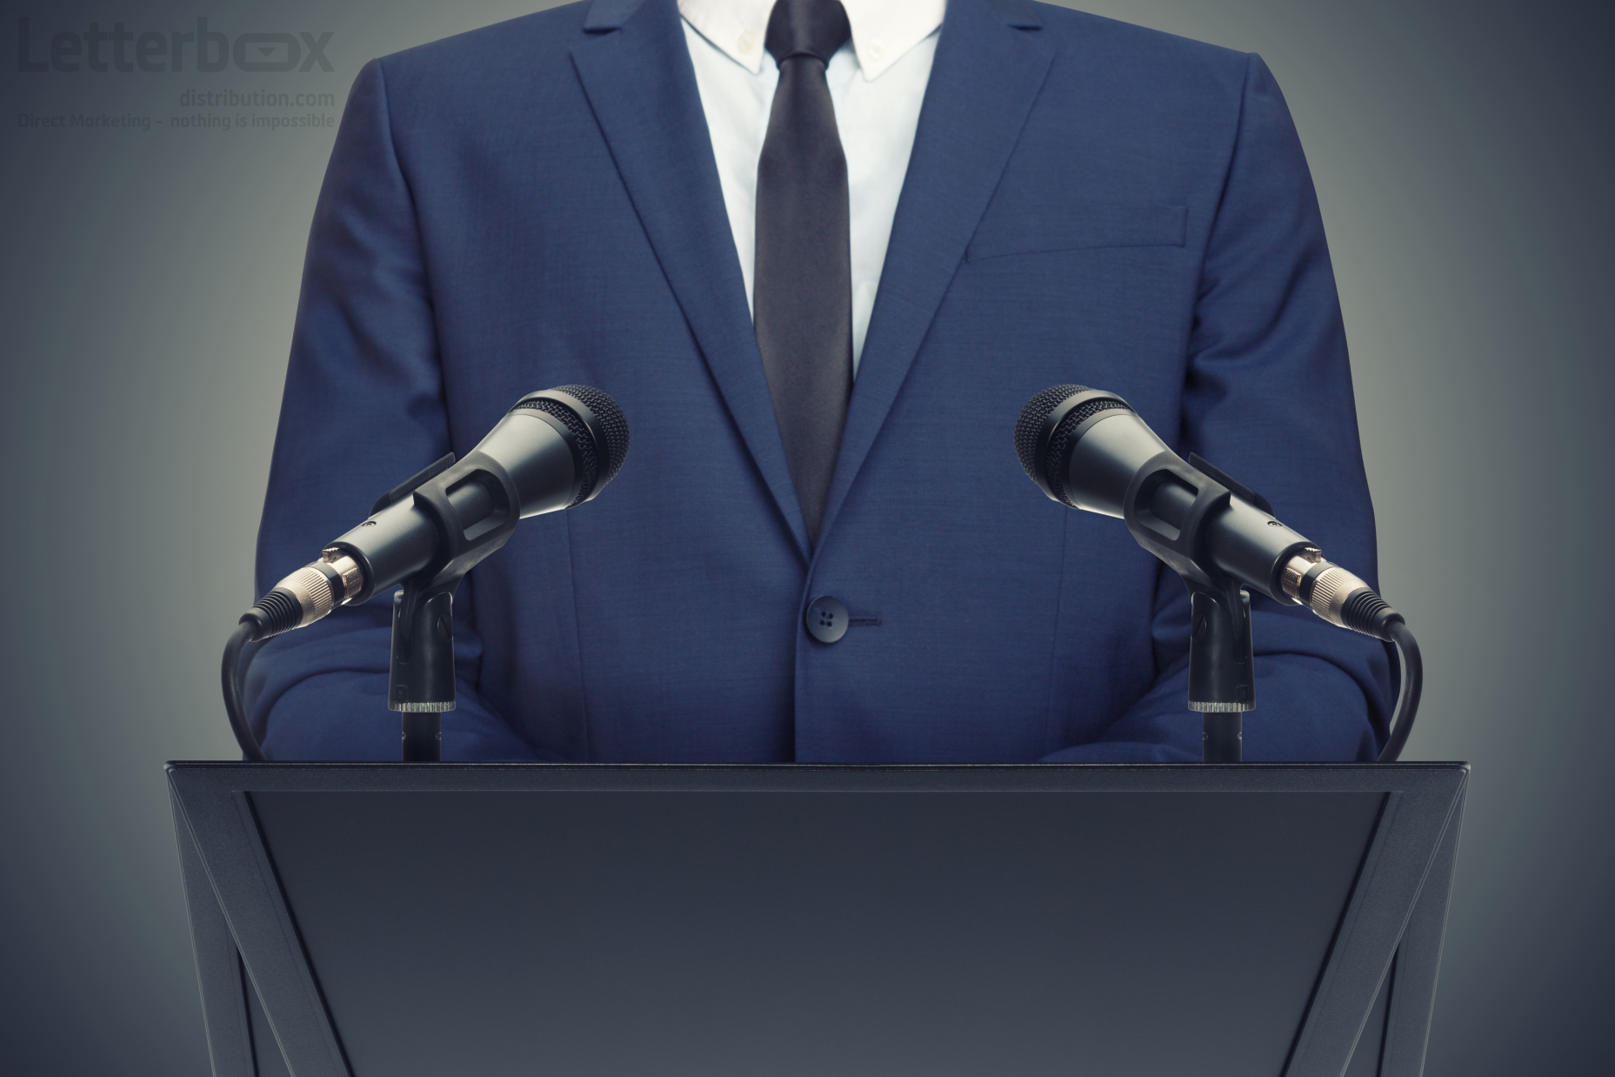 a politician is standing at a podium with two microphones on it. He is wearing a blue suit and a black tie